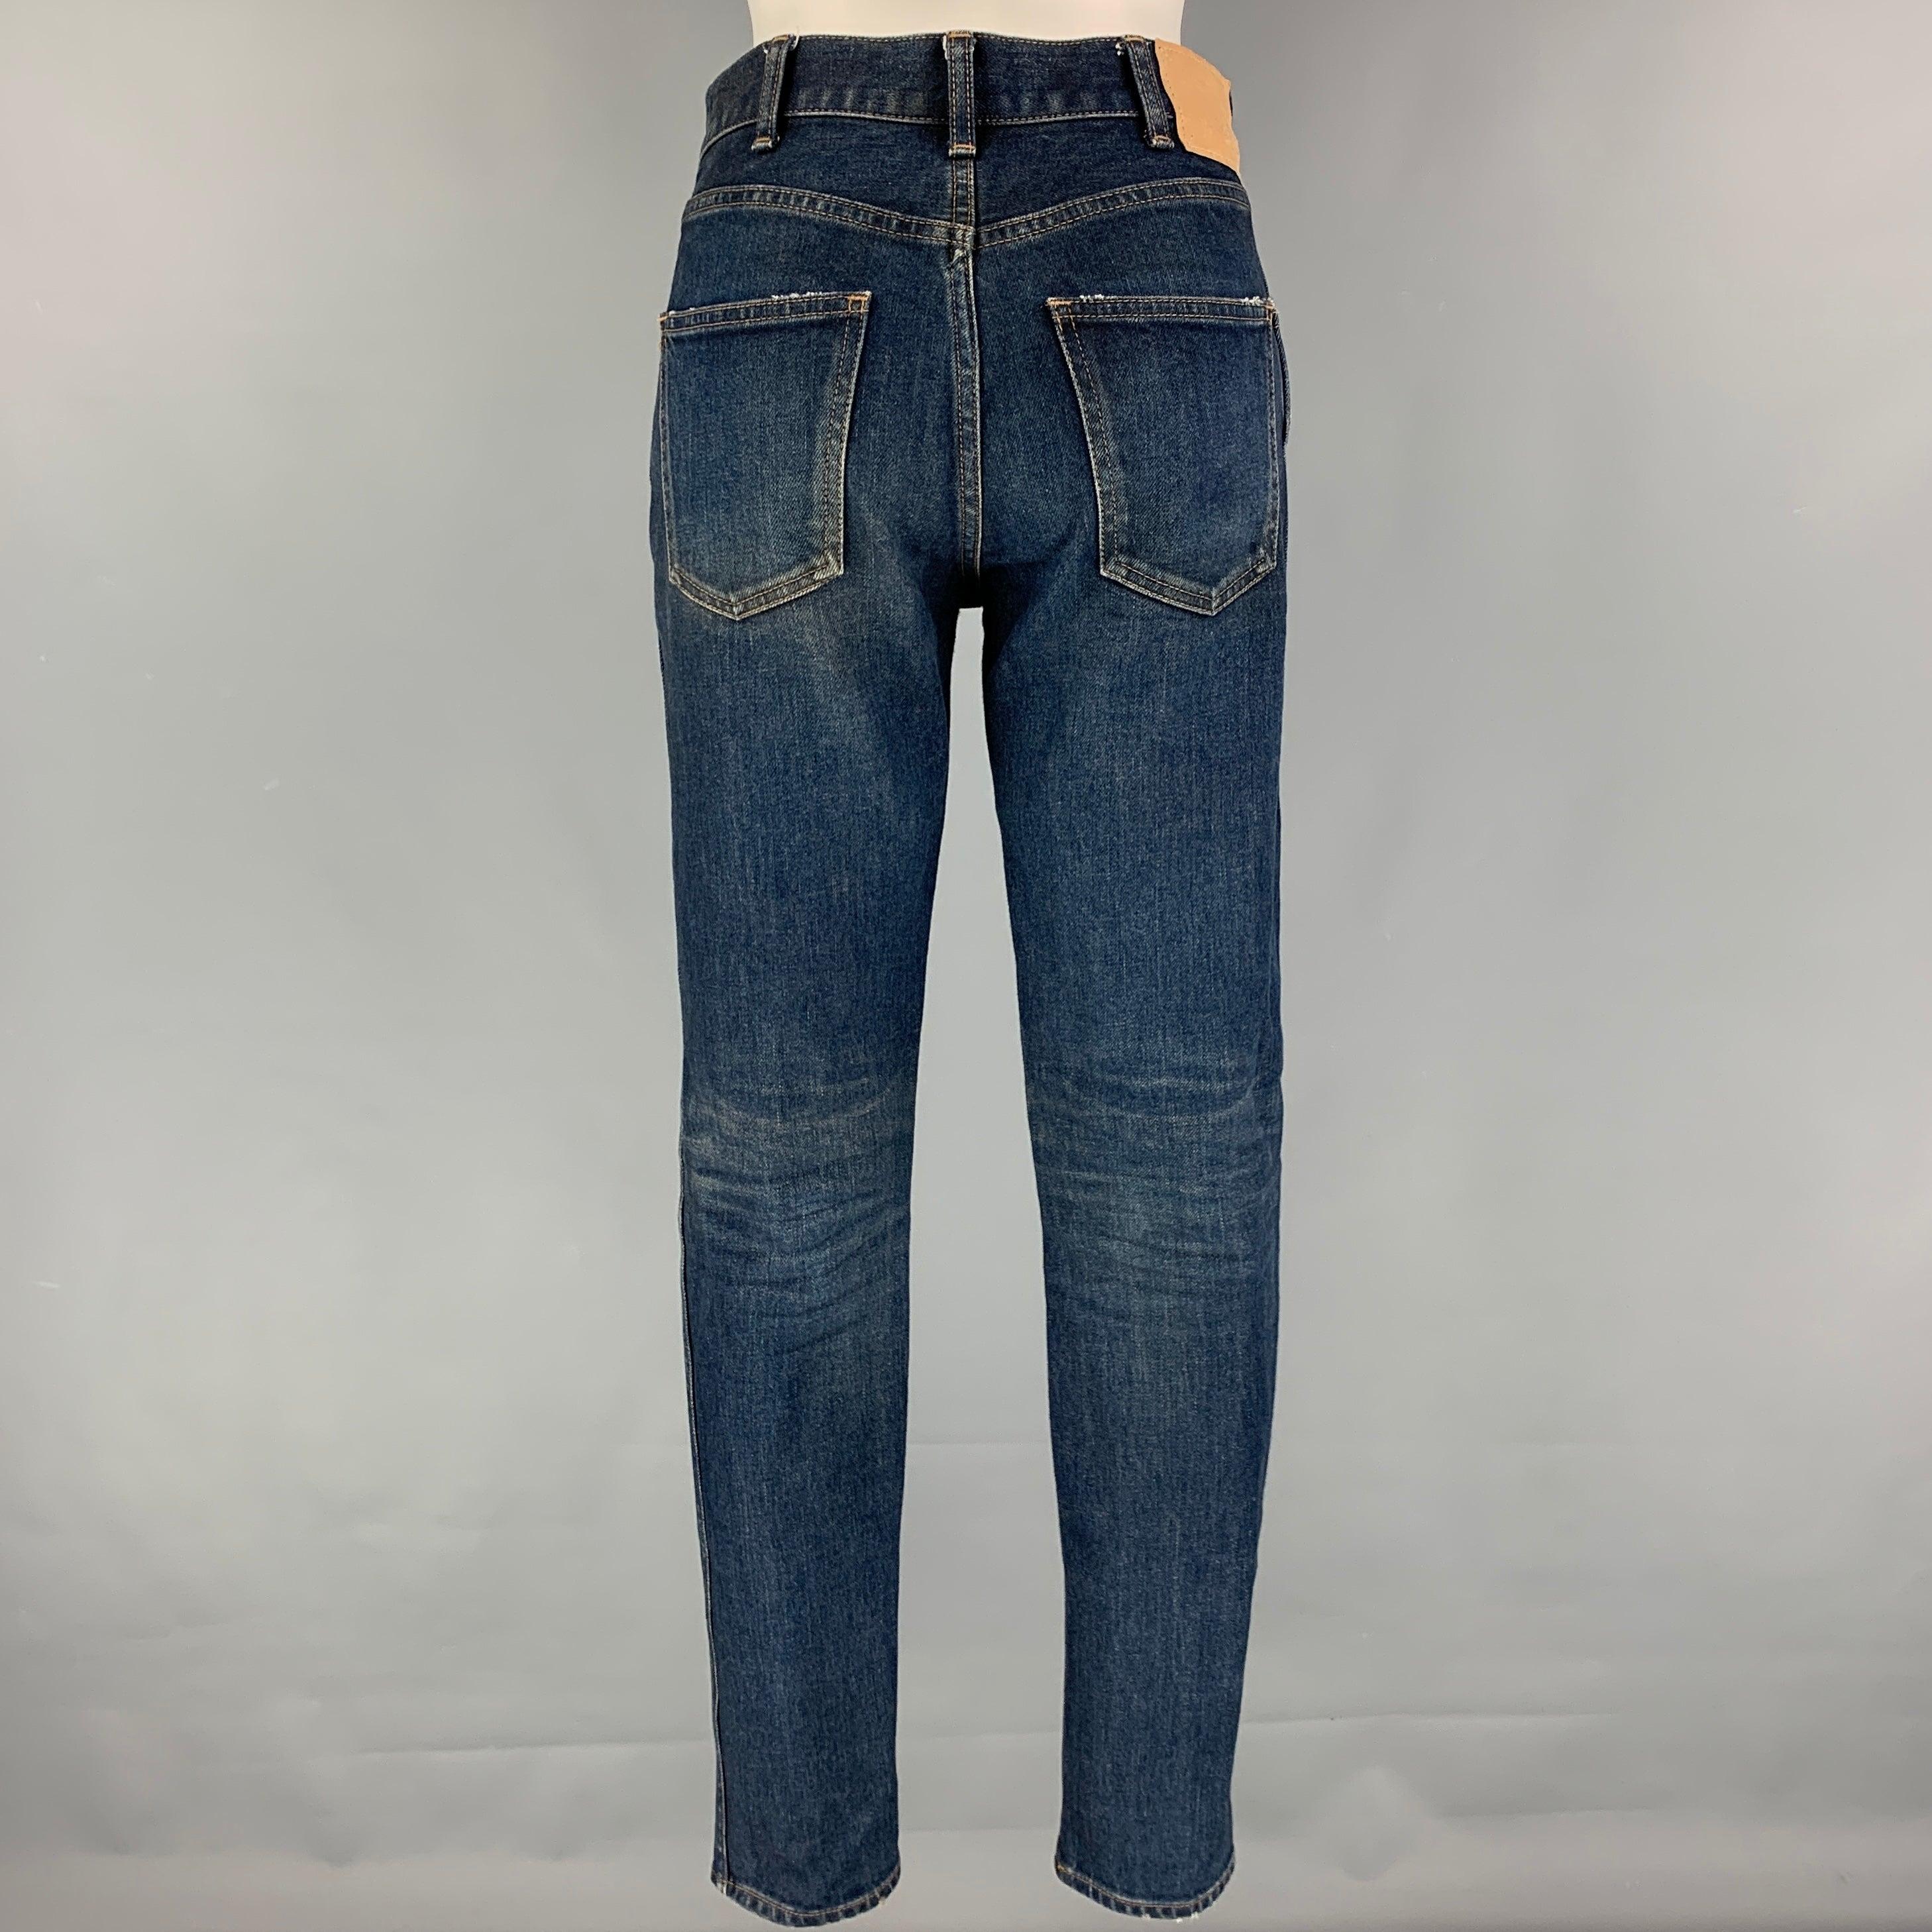 CELINE 'Slim Patch' jeans comes in a dark blue cotton featuring a slim fit, contrast stitching, and a zip fly closure. Made in Japan.
Very Good
Pre-Owned Condition. 

Marked:   26 

Measurements: 
  Waist: 28 inches  Rise: 9.5 inches  Inseam: 30